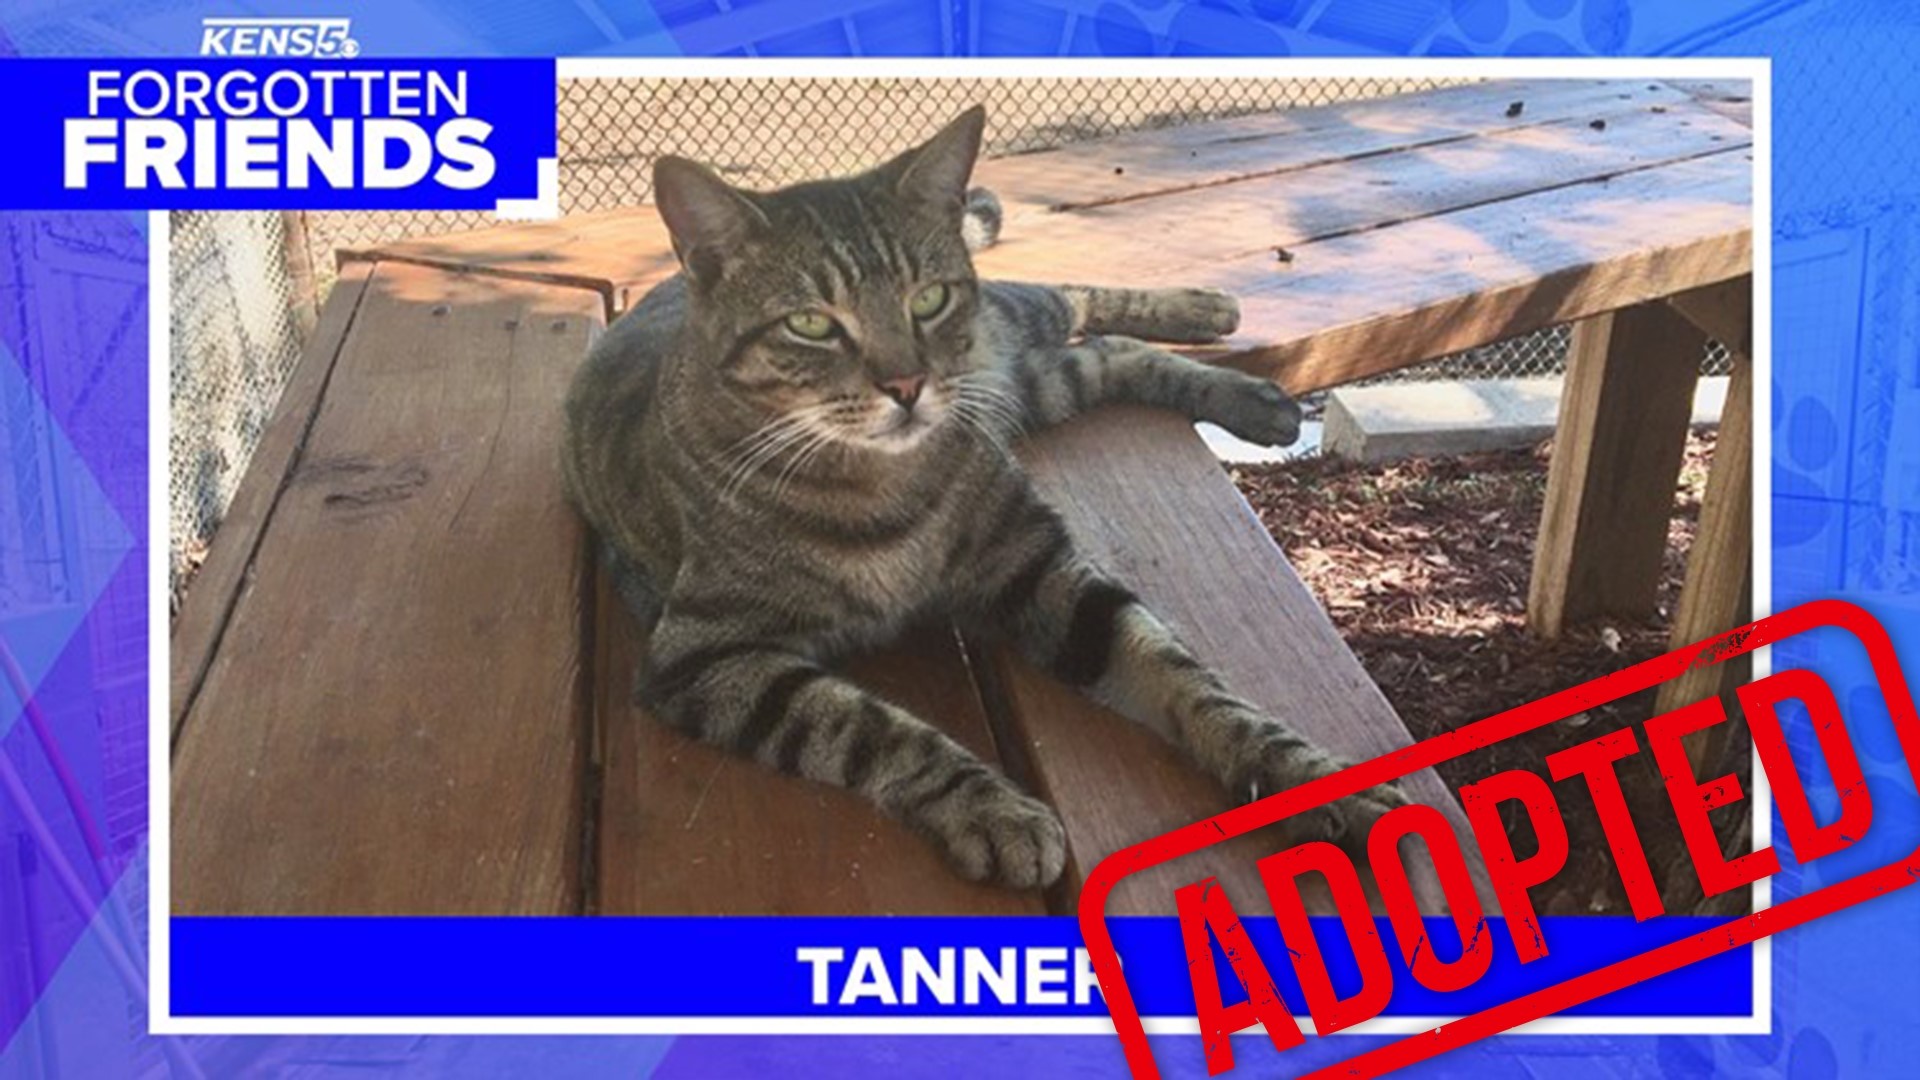 Lisa Pfeifer said she heard about Tanner on KENS 5 and decided he was the kitty for her!